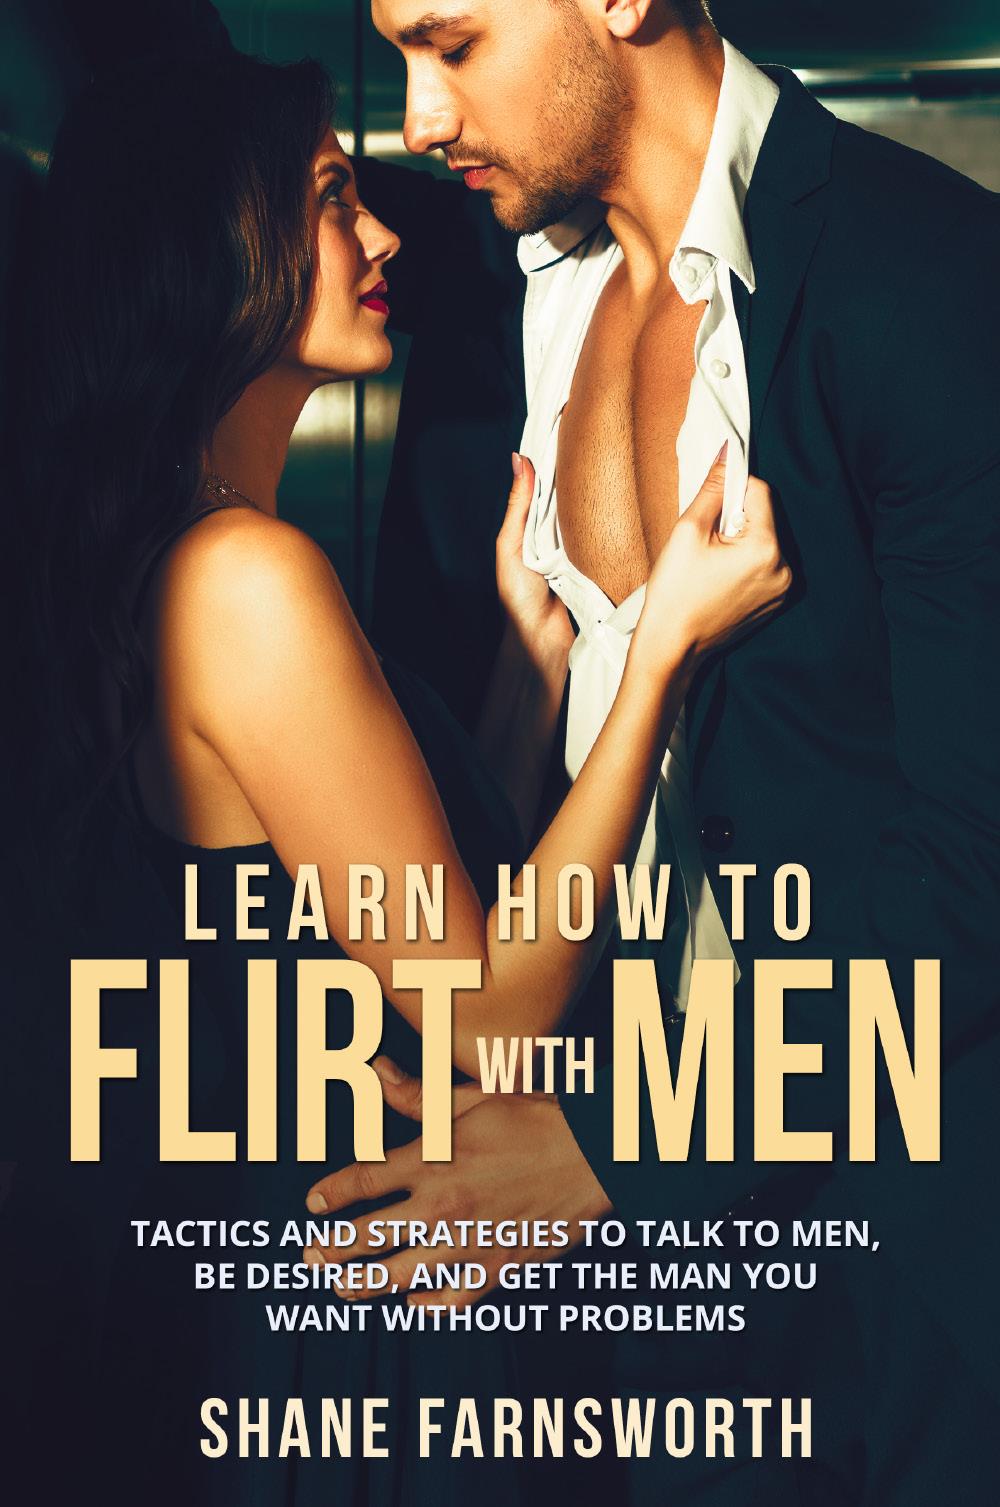 Learn How to flirt with men. Tactics and strategies to talk to men, be desired, and get the man you want without problems